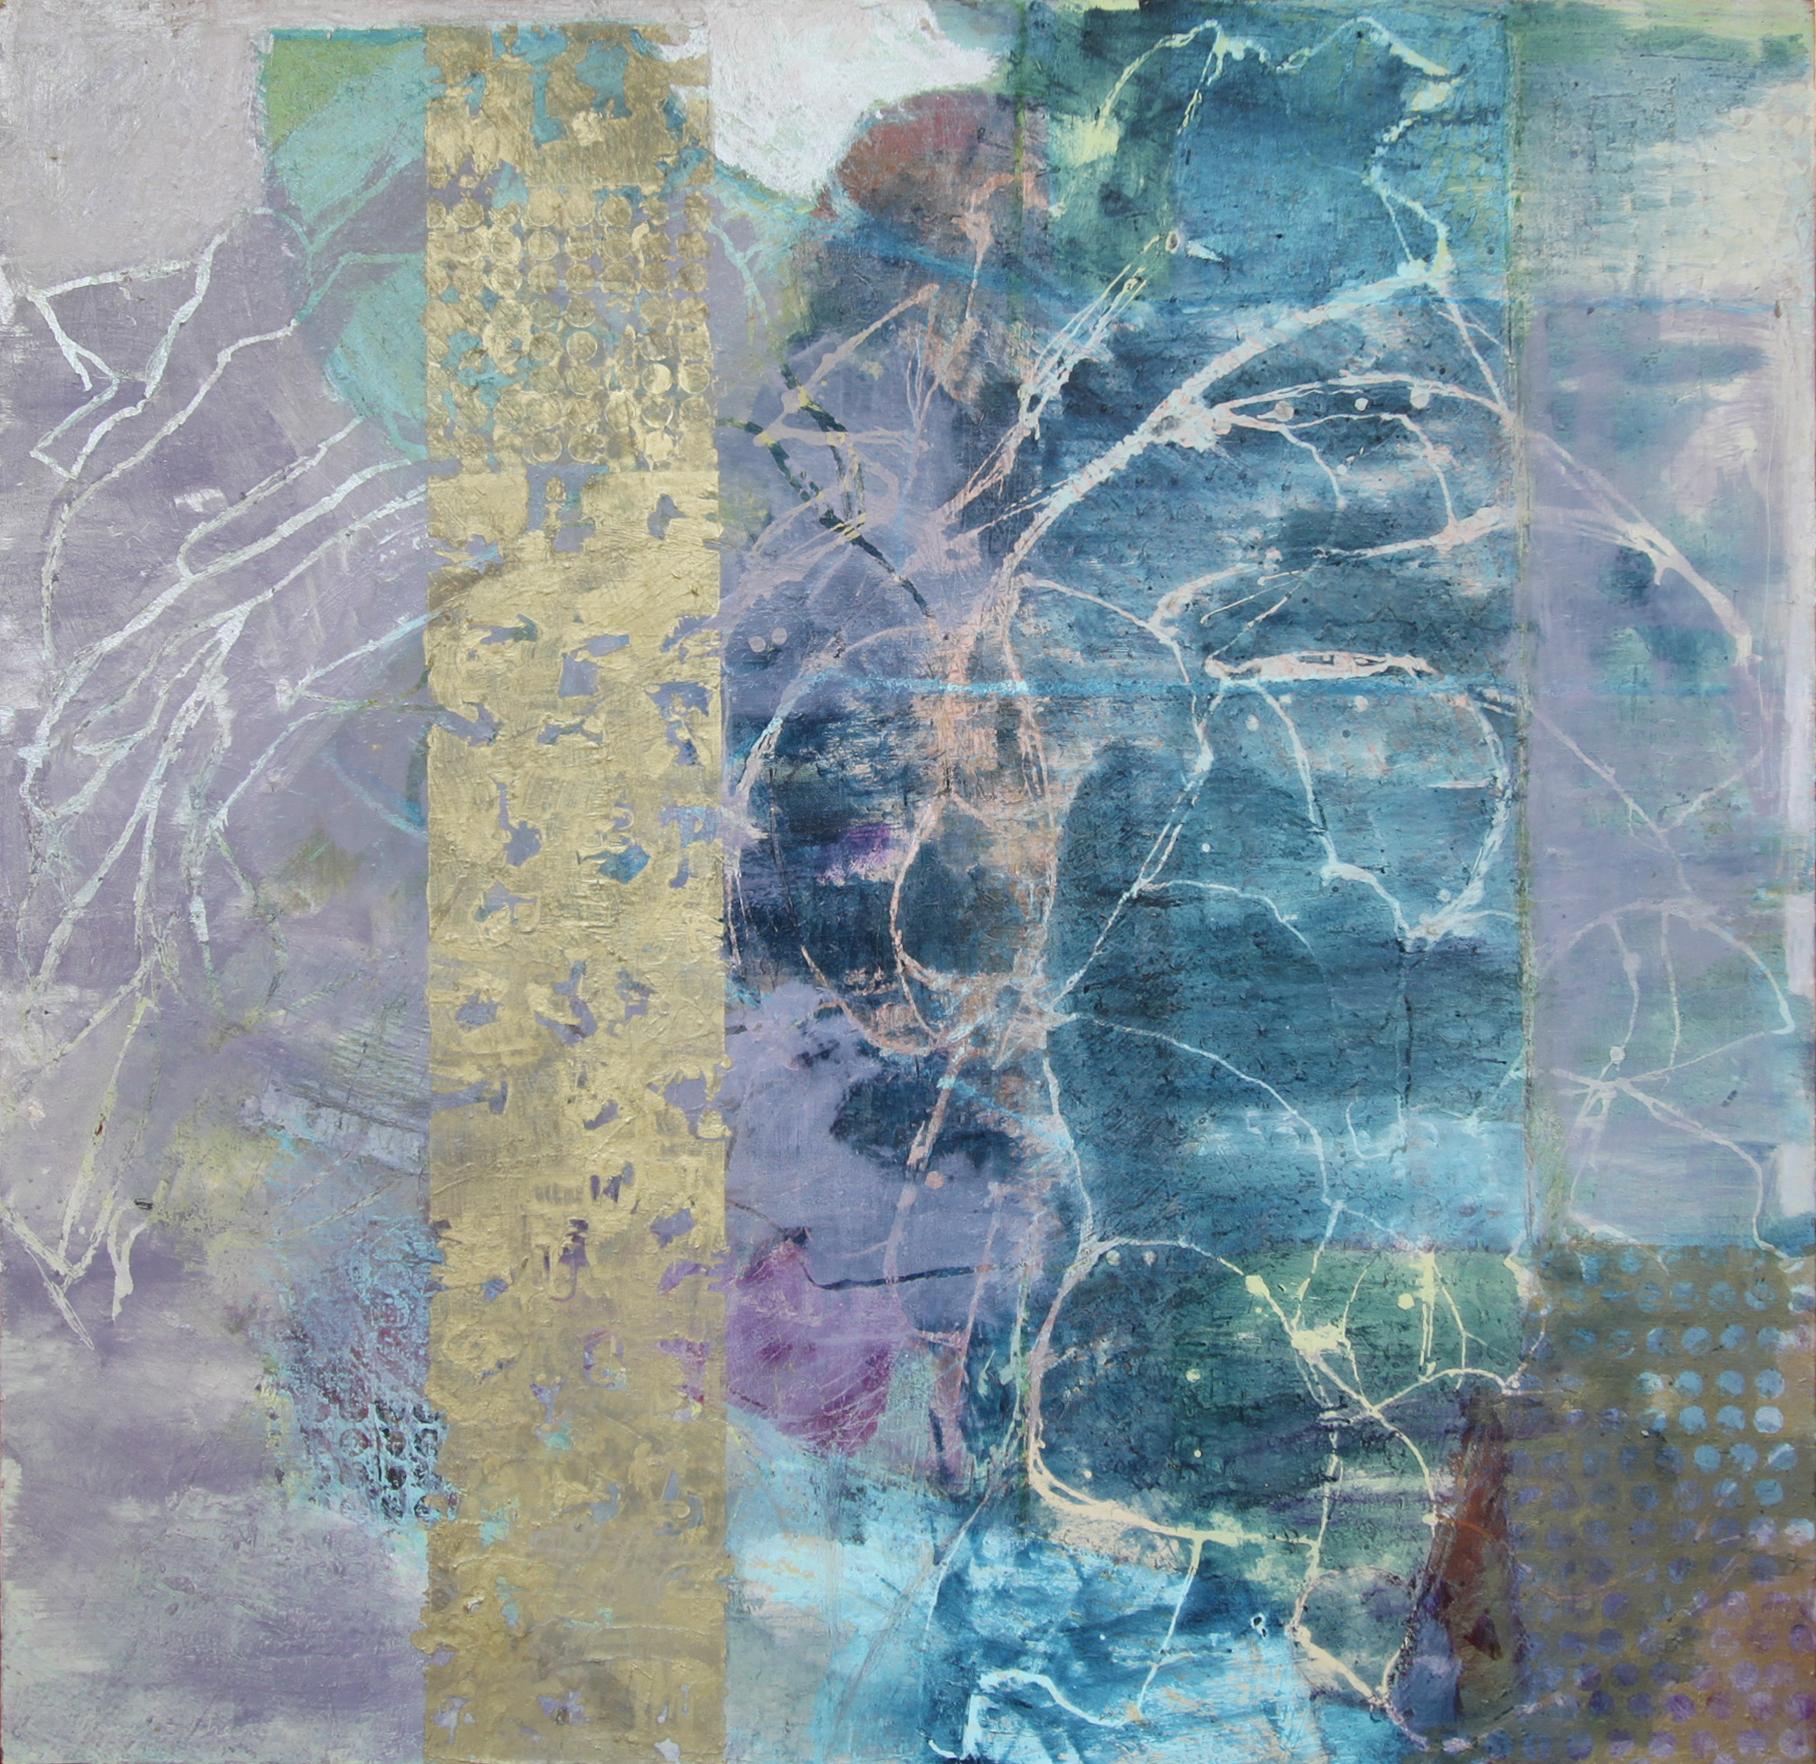 "Fallen From a Higher Place, " Abstract Painting - Mixed Media Art by Christine Averill-Green